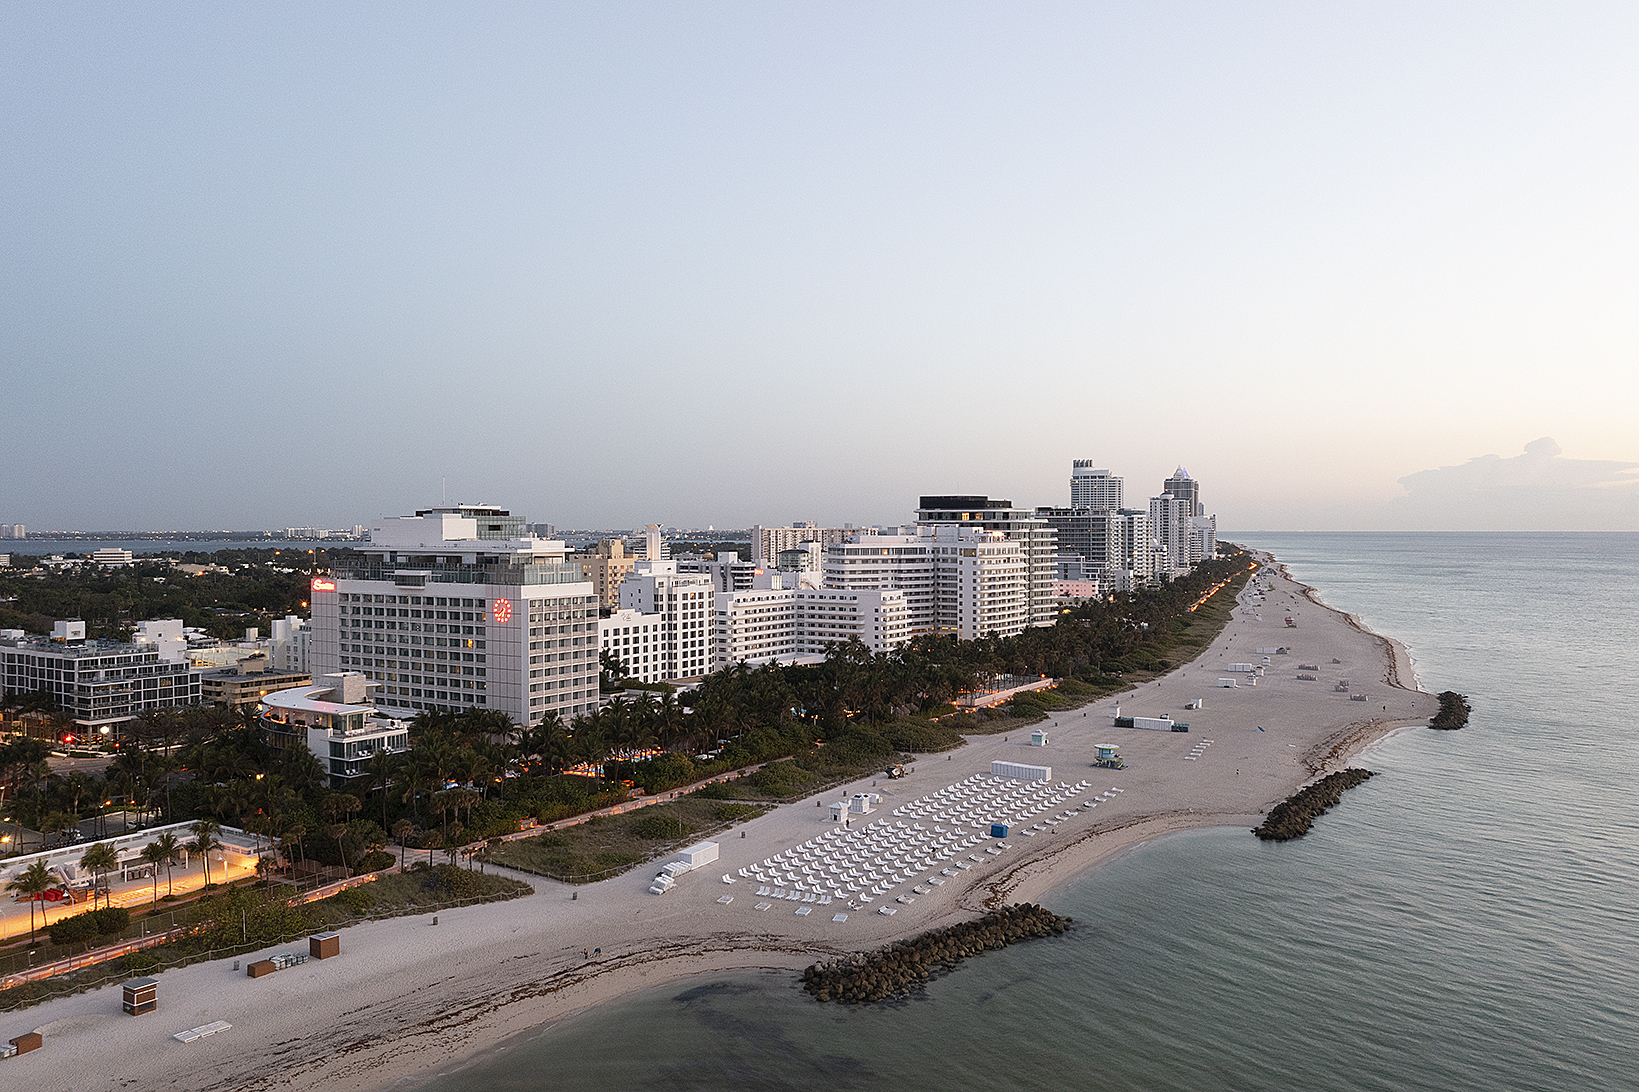 Drone Photography in Miami